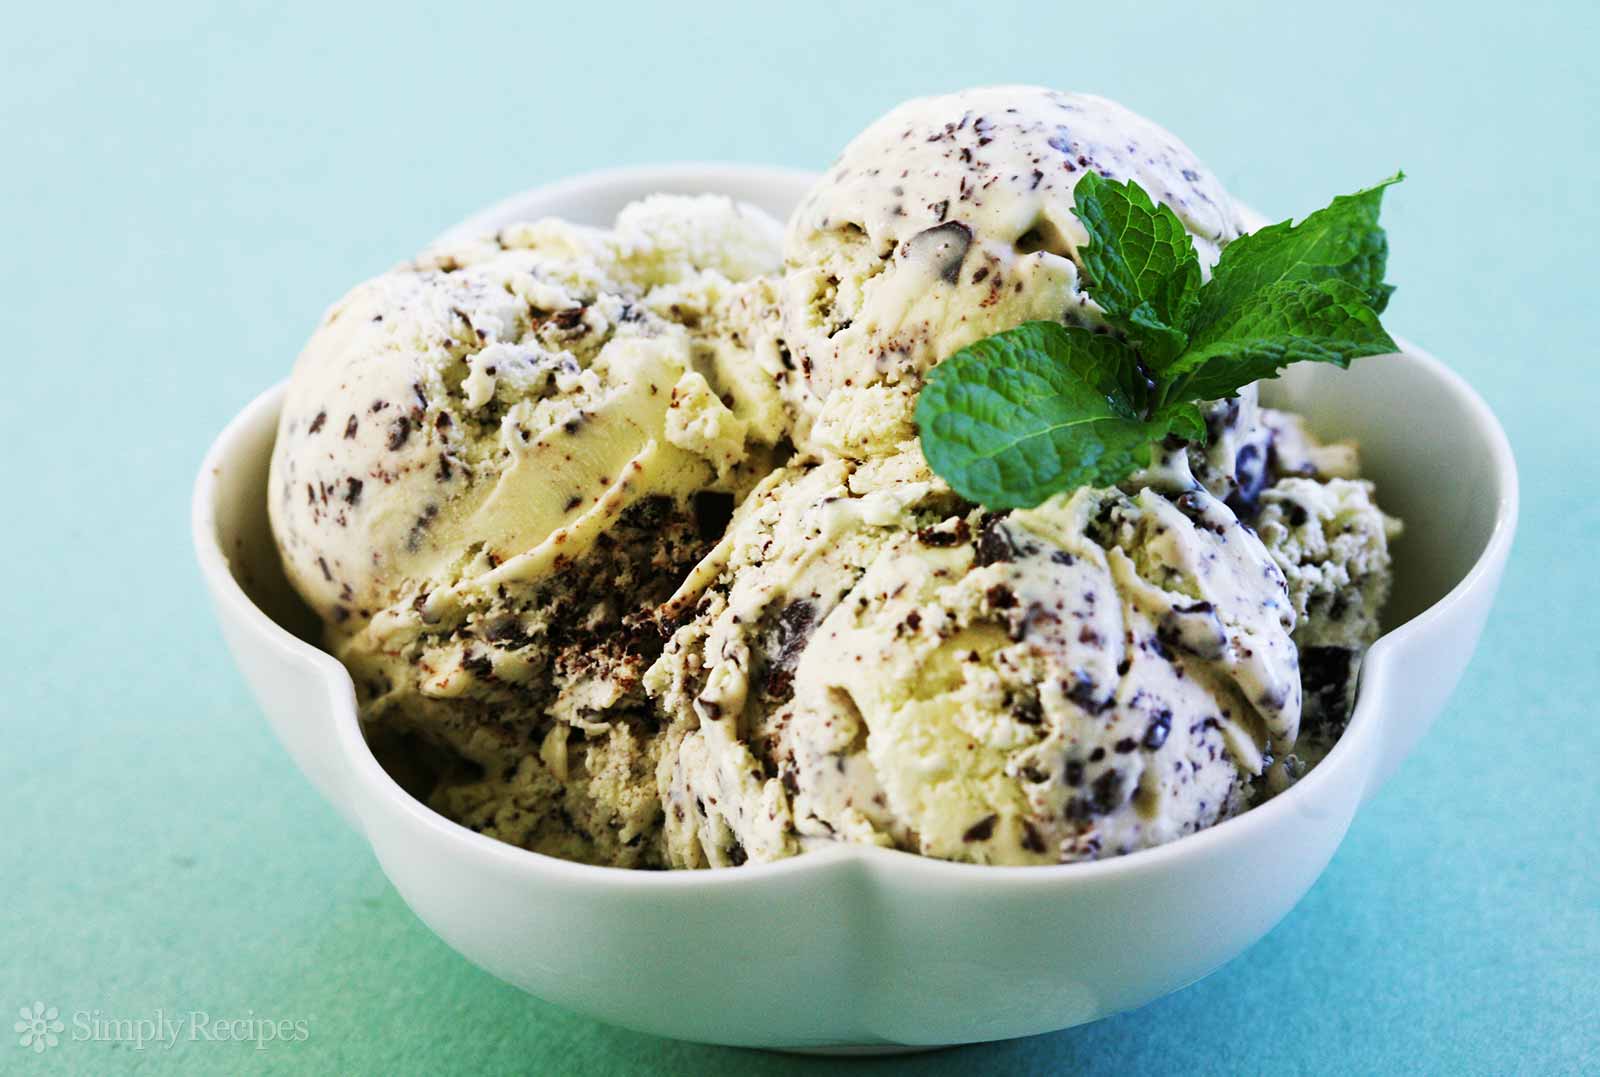 🍰 This Overrated/Underrated Dessert Quiz Will Reveal Your Best Personality Trait Mint chocolate chip ice cream